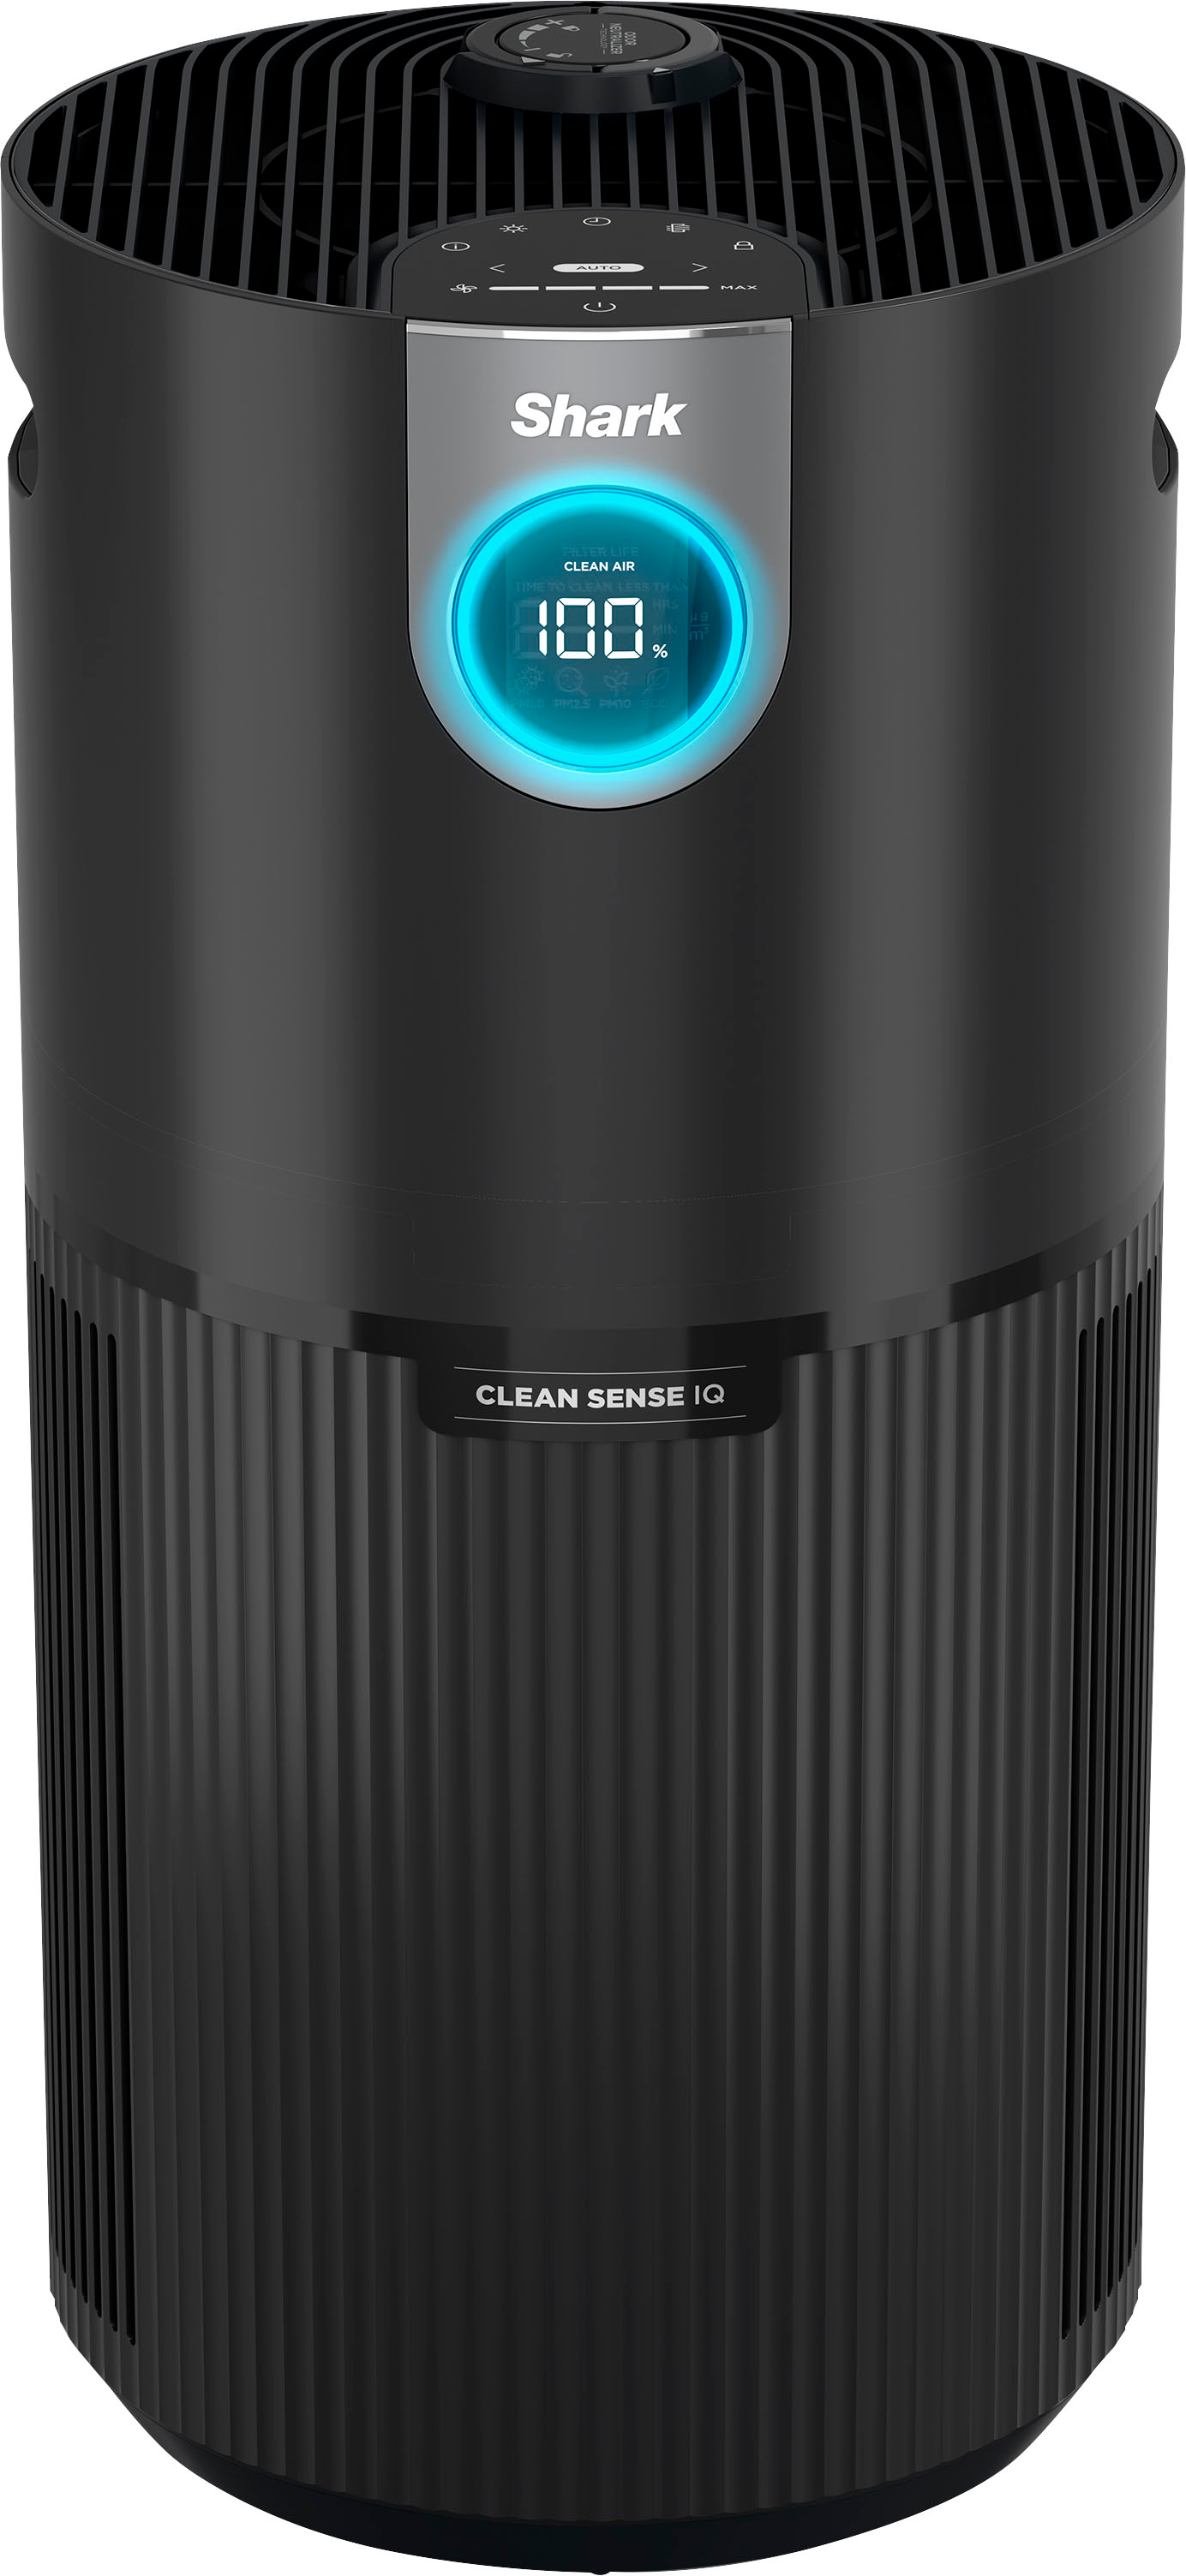 Discounted air purifiers and filters